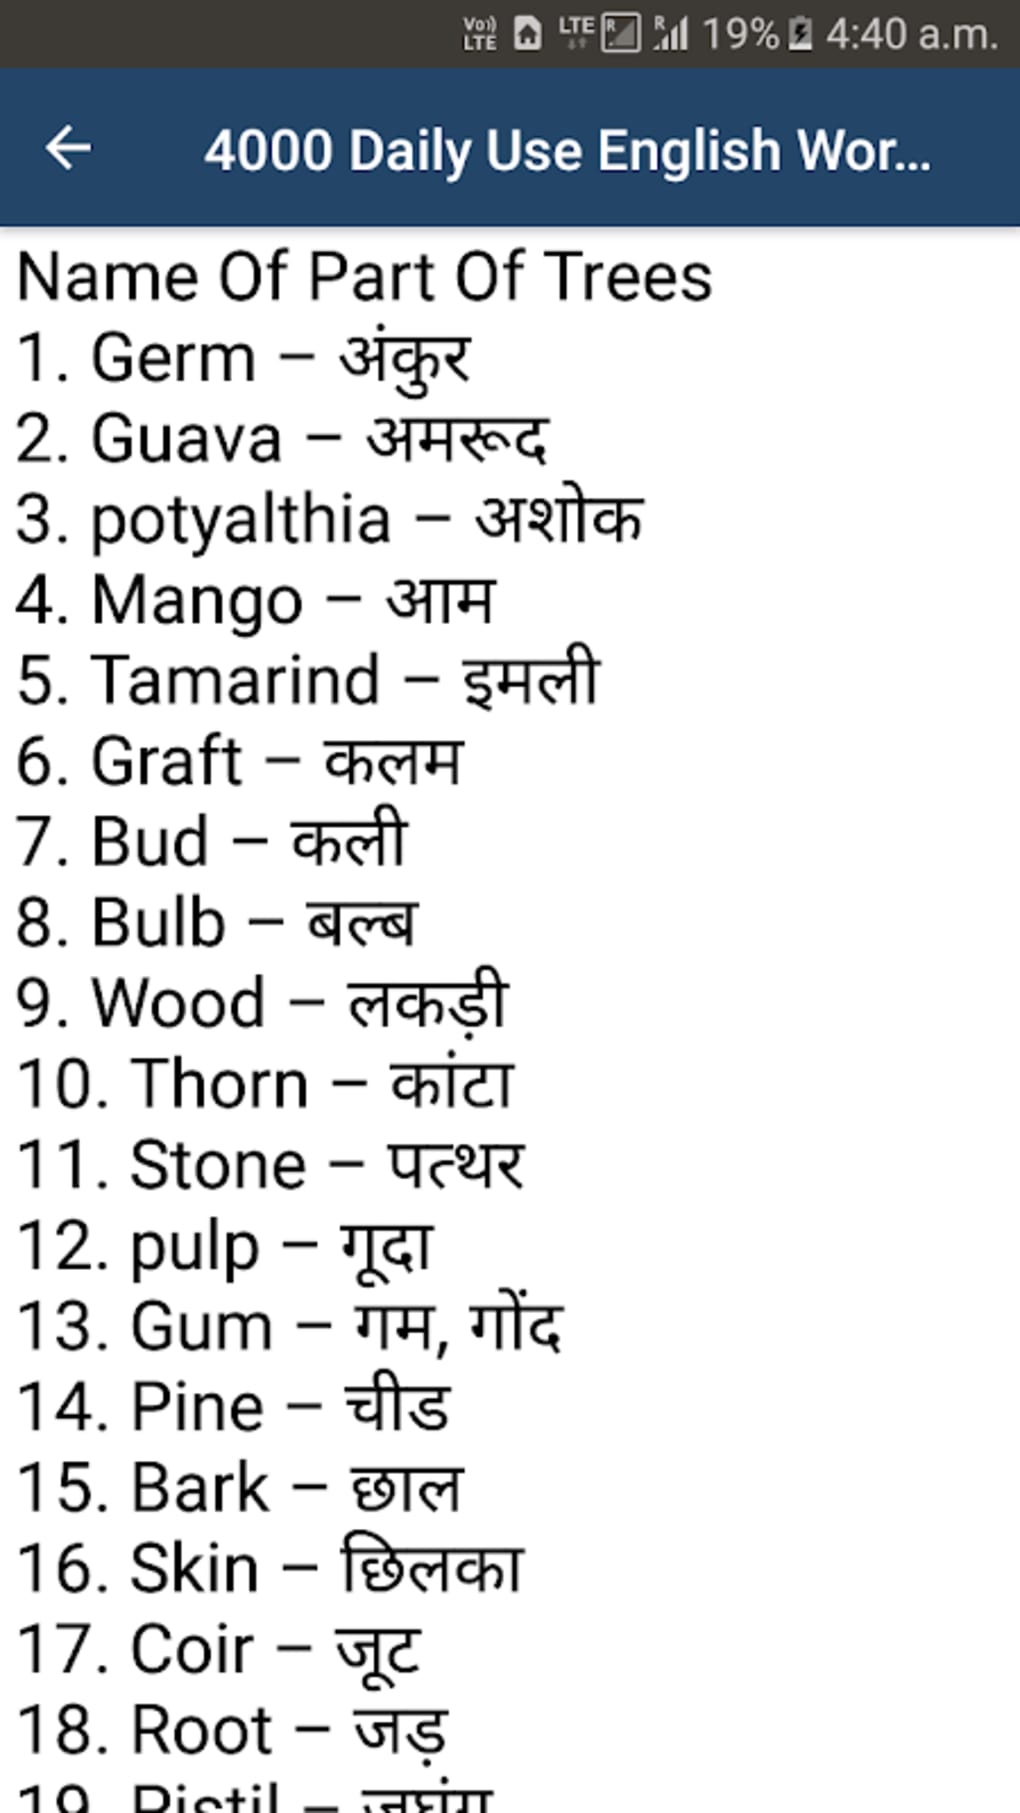 100 Daily Use English Words With Hindi Meaning